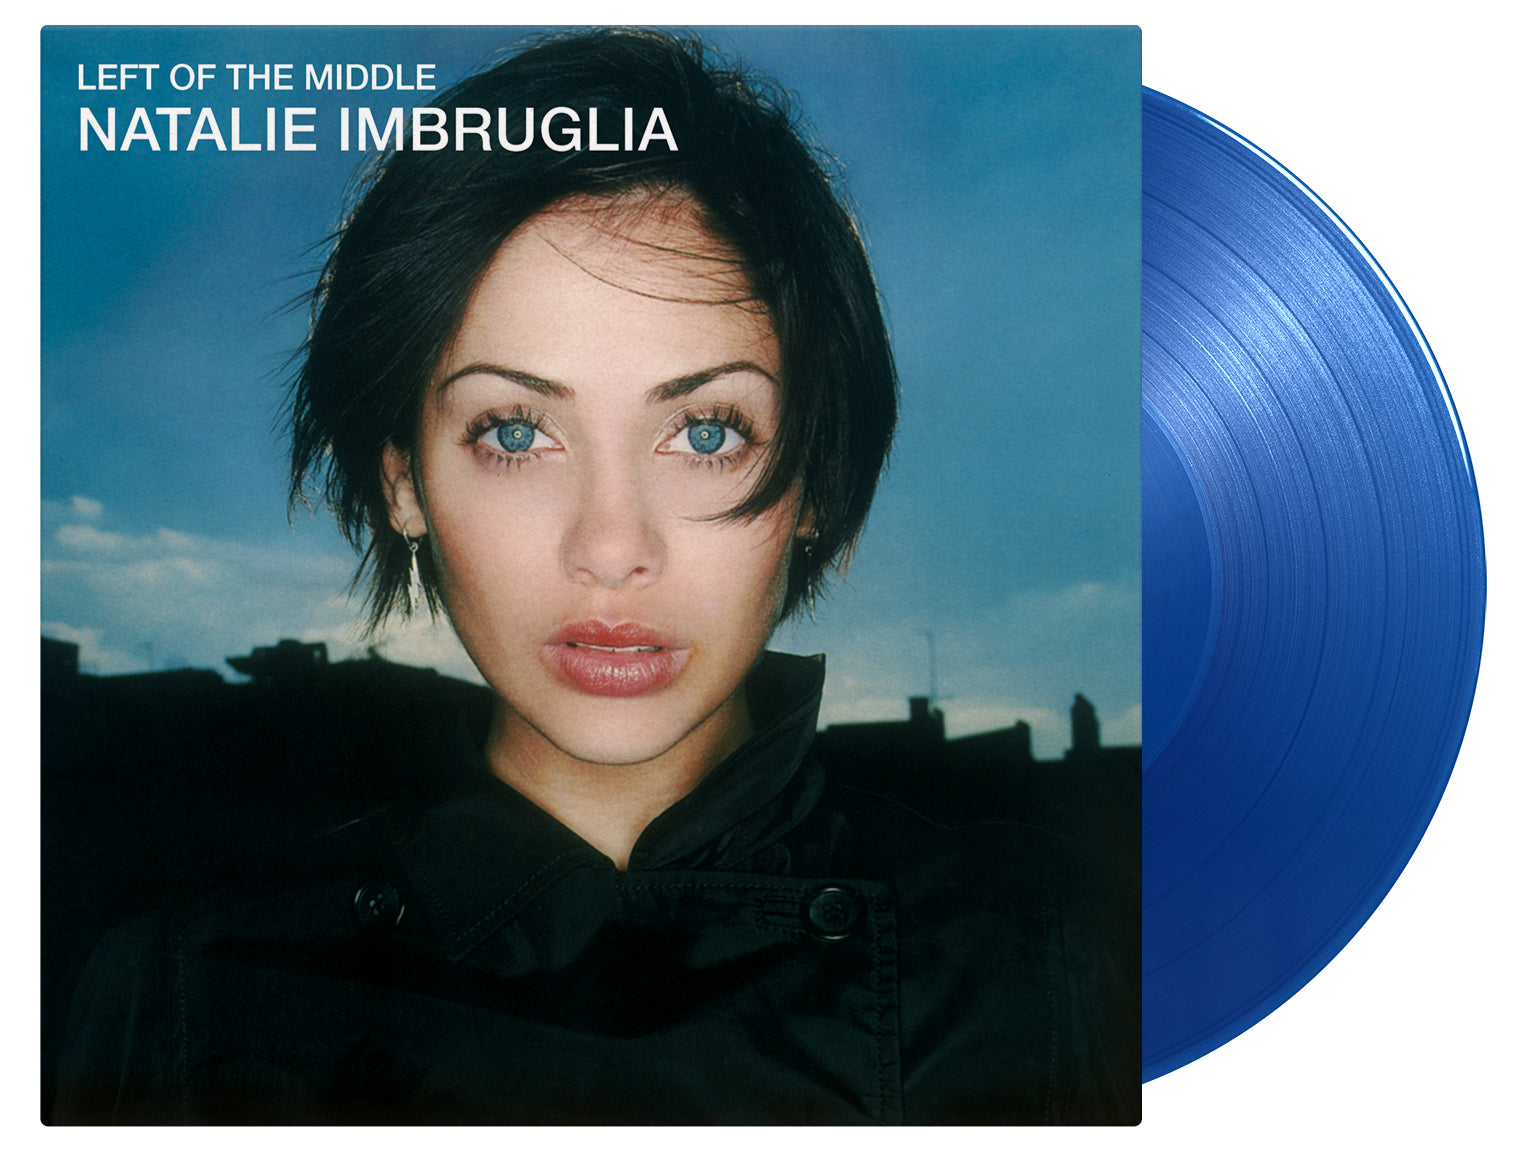 NATALIE IMBRUGLIA - LEFT OF THE MIDDLE (25TH ANNIVERSARY EDITION)